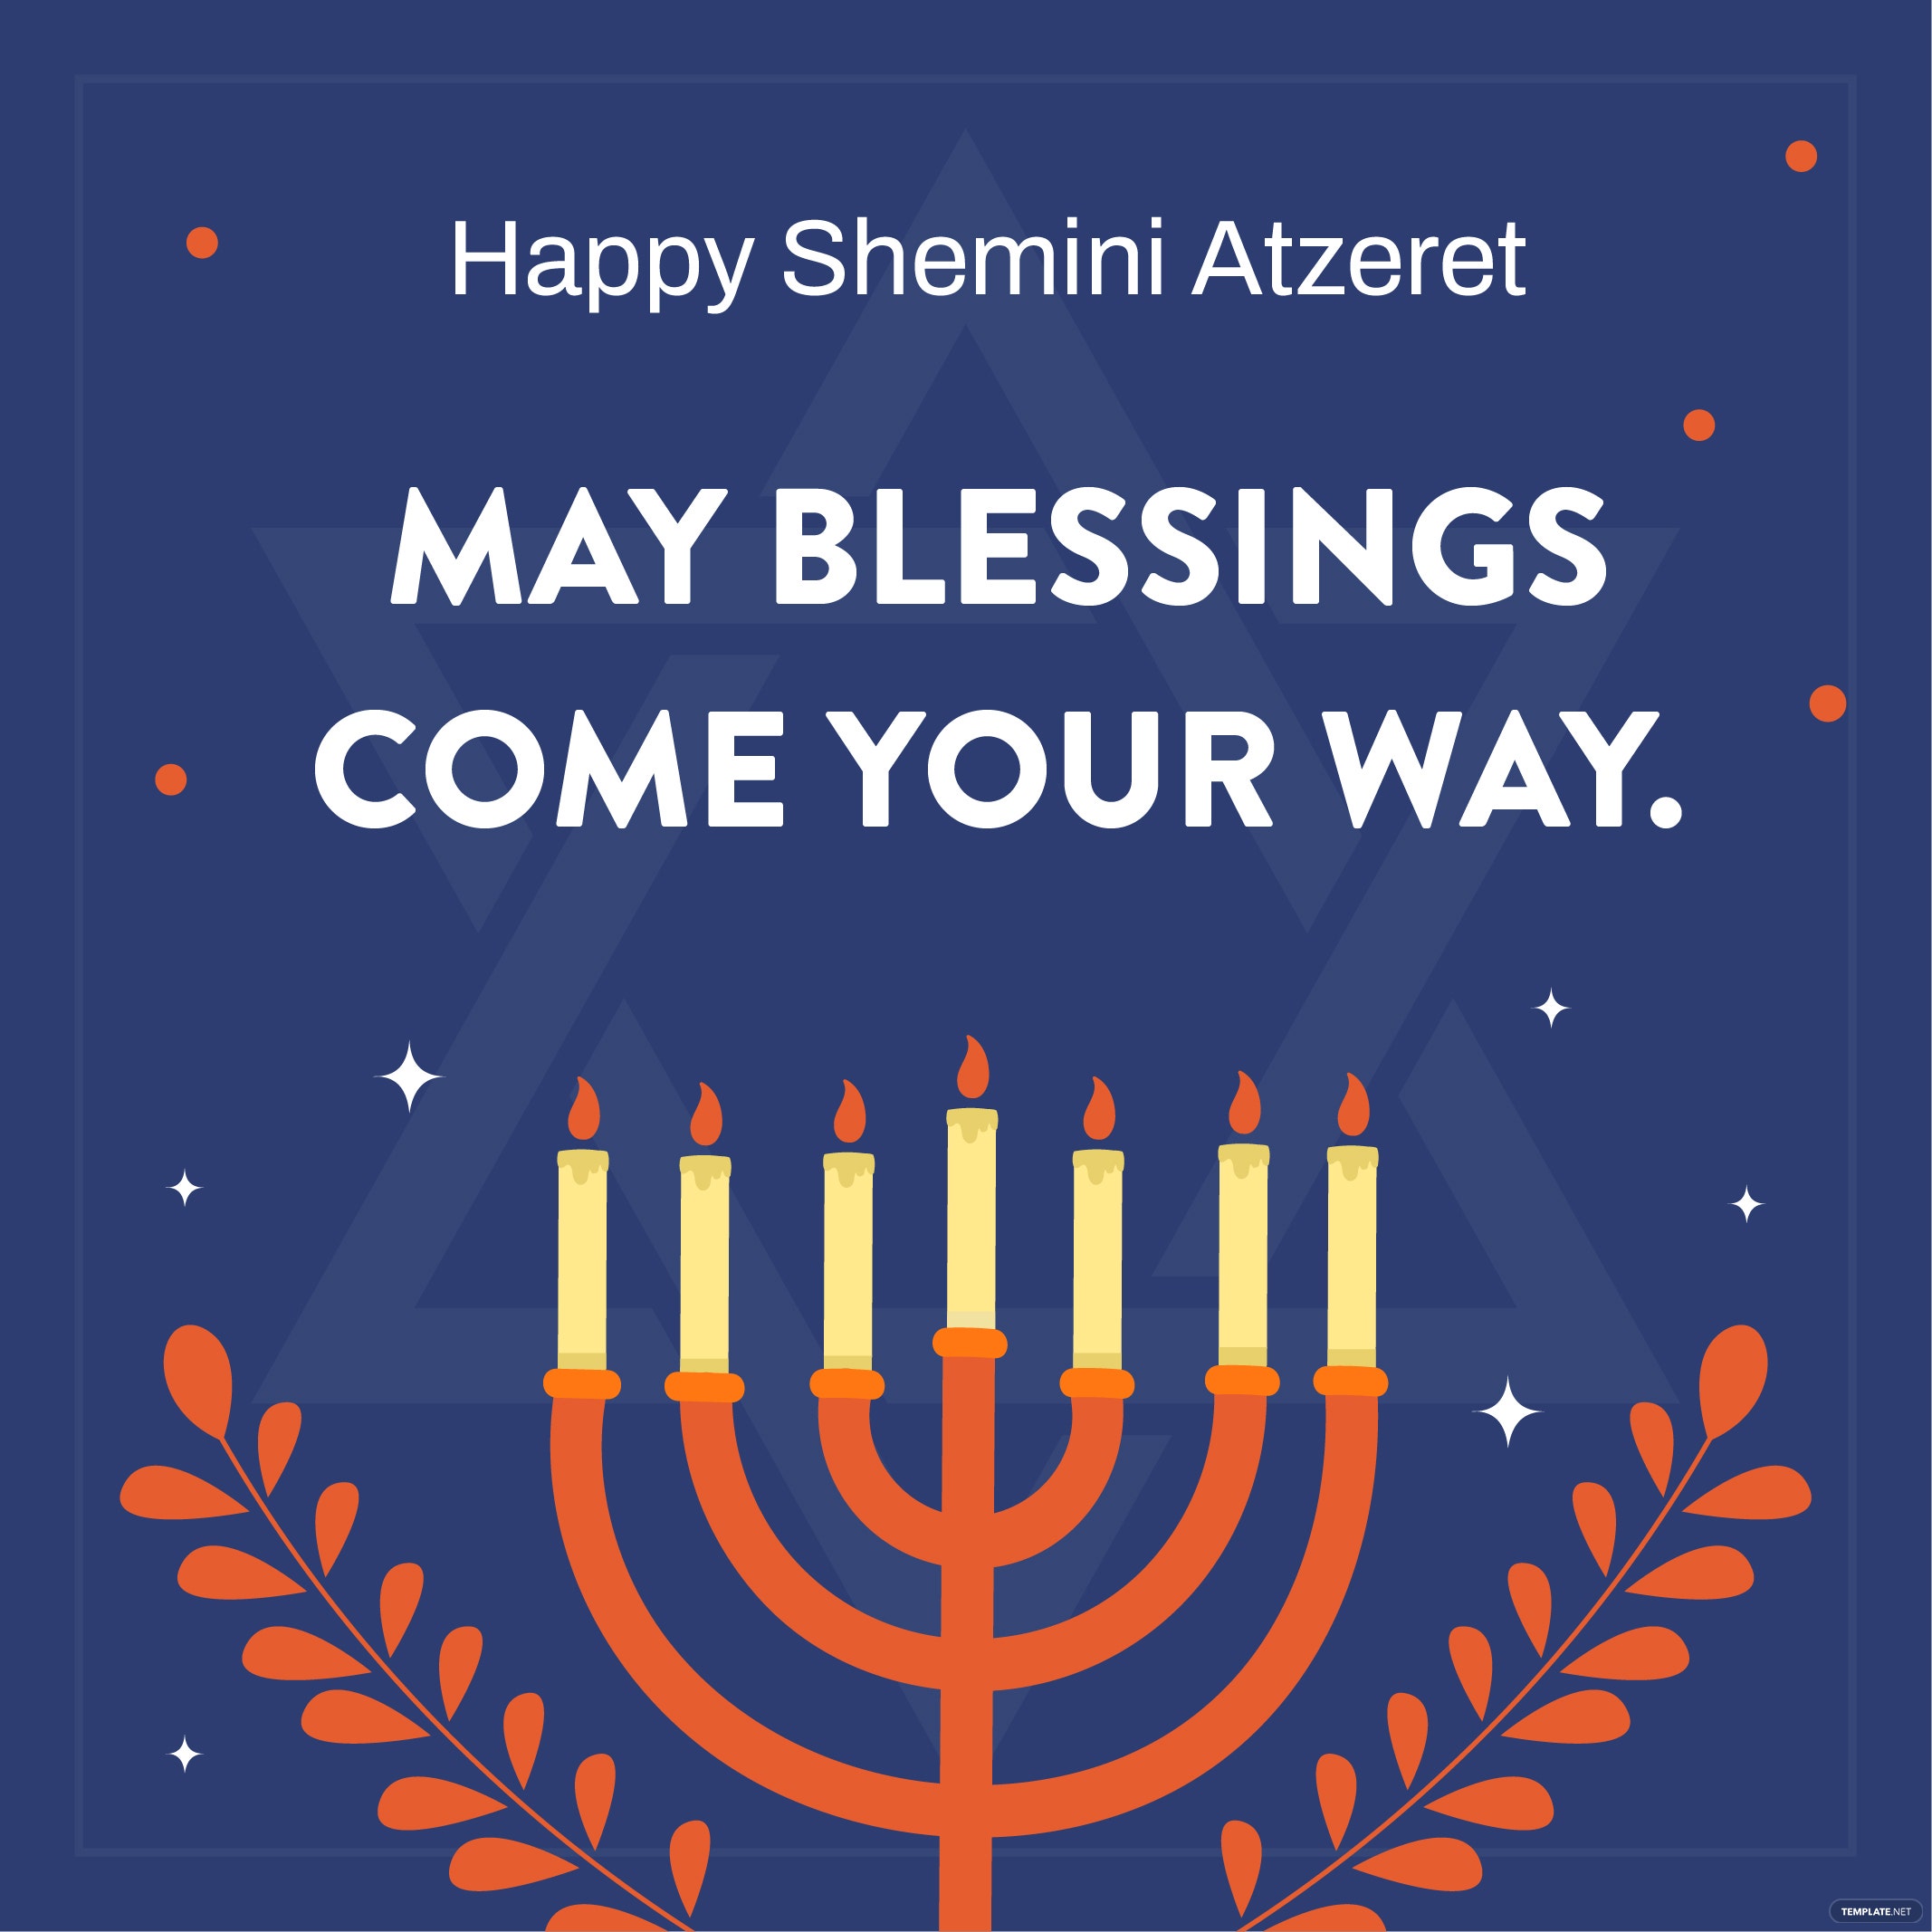 shemini atzeret greeting card vector ideas and examples